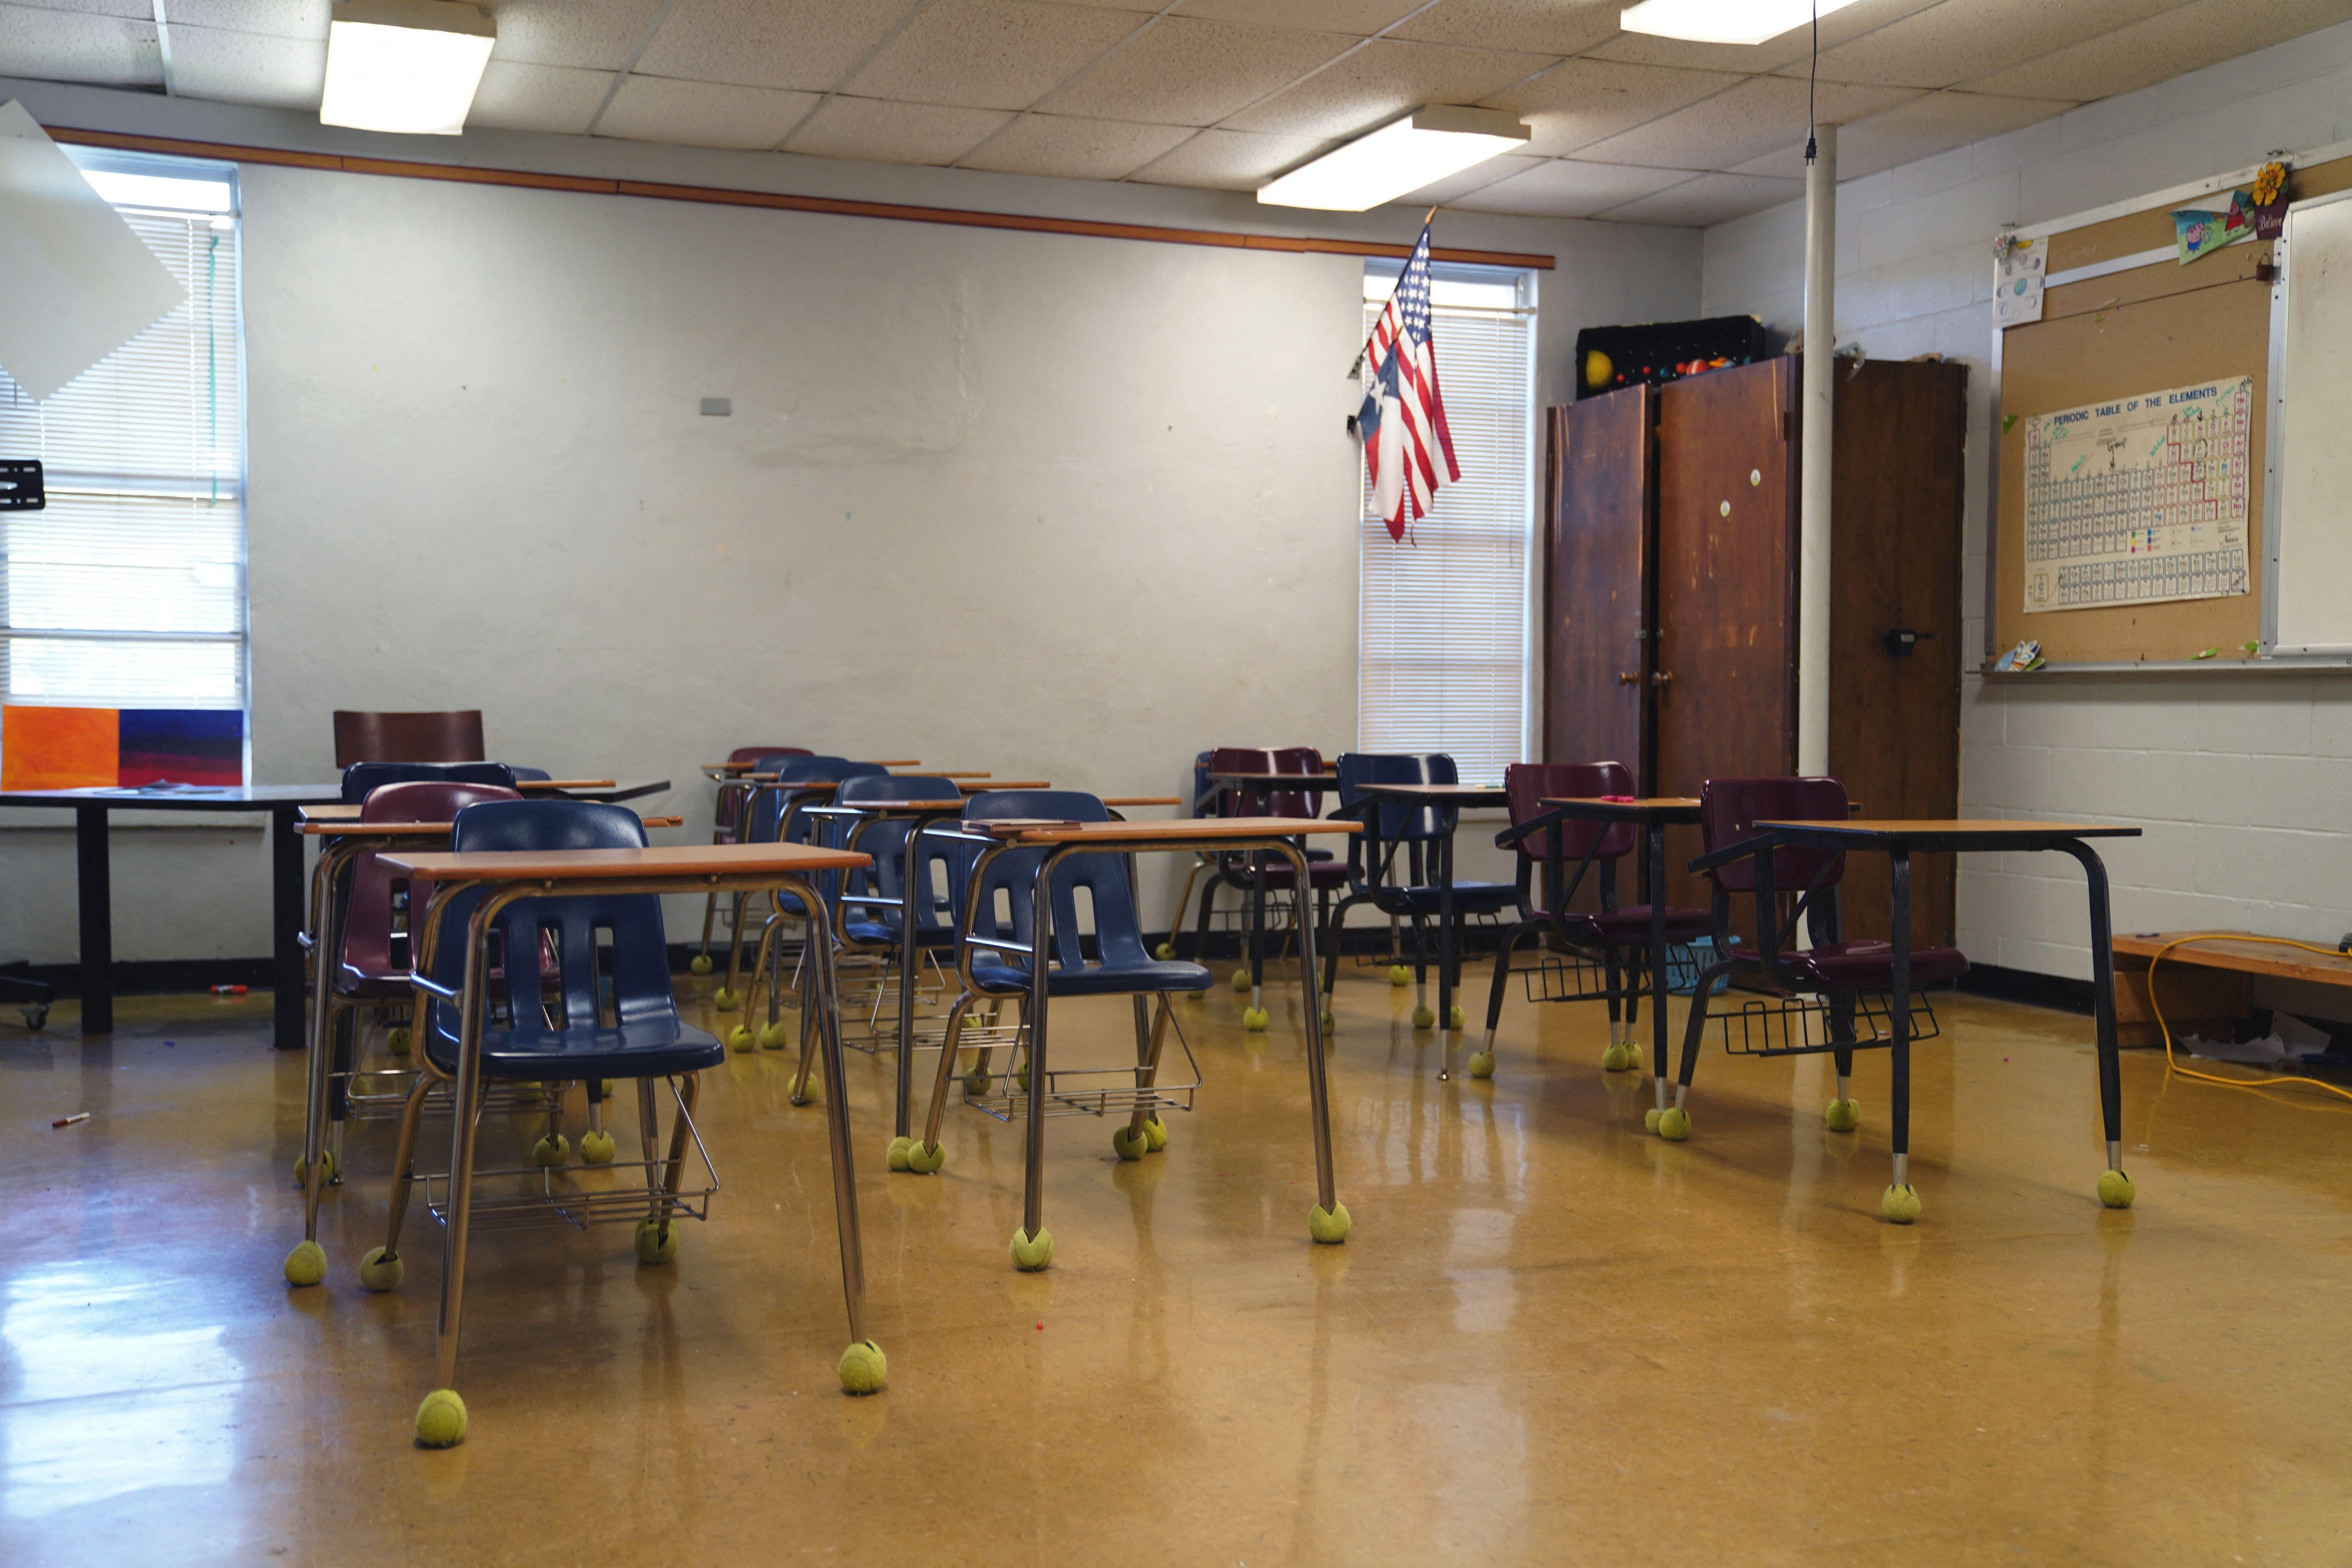 An empty school classroom with desks, chairs, and a whiteboard